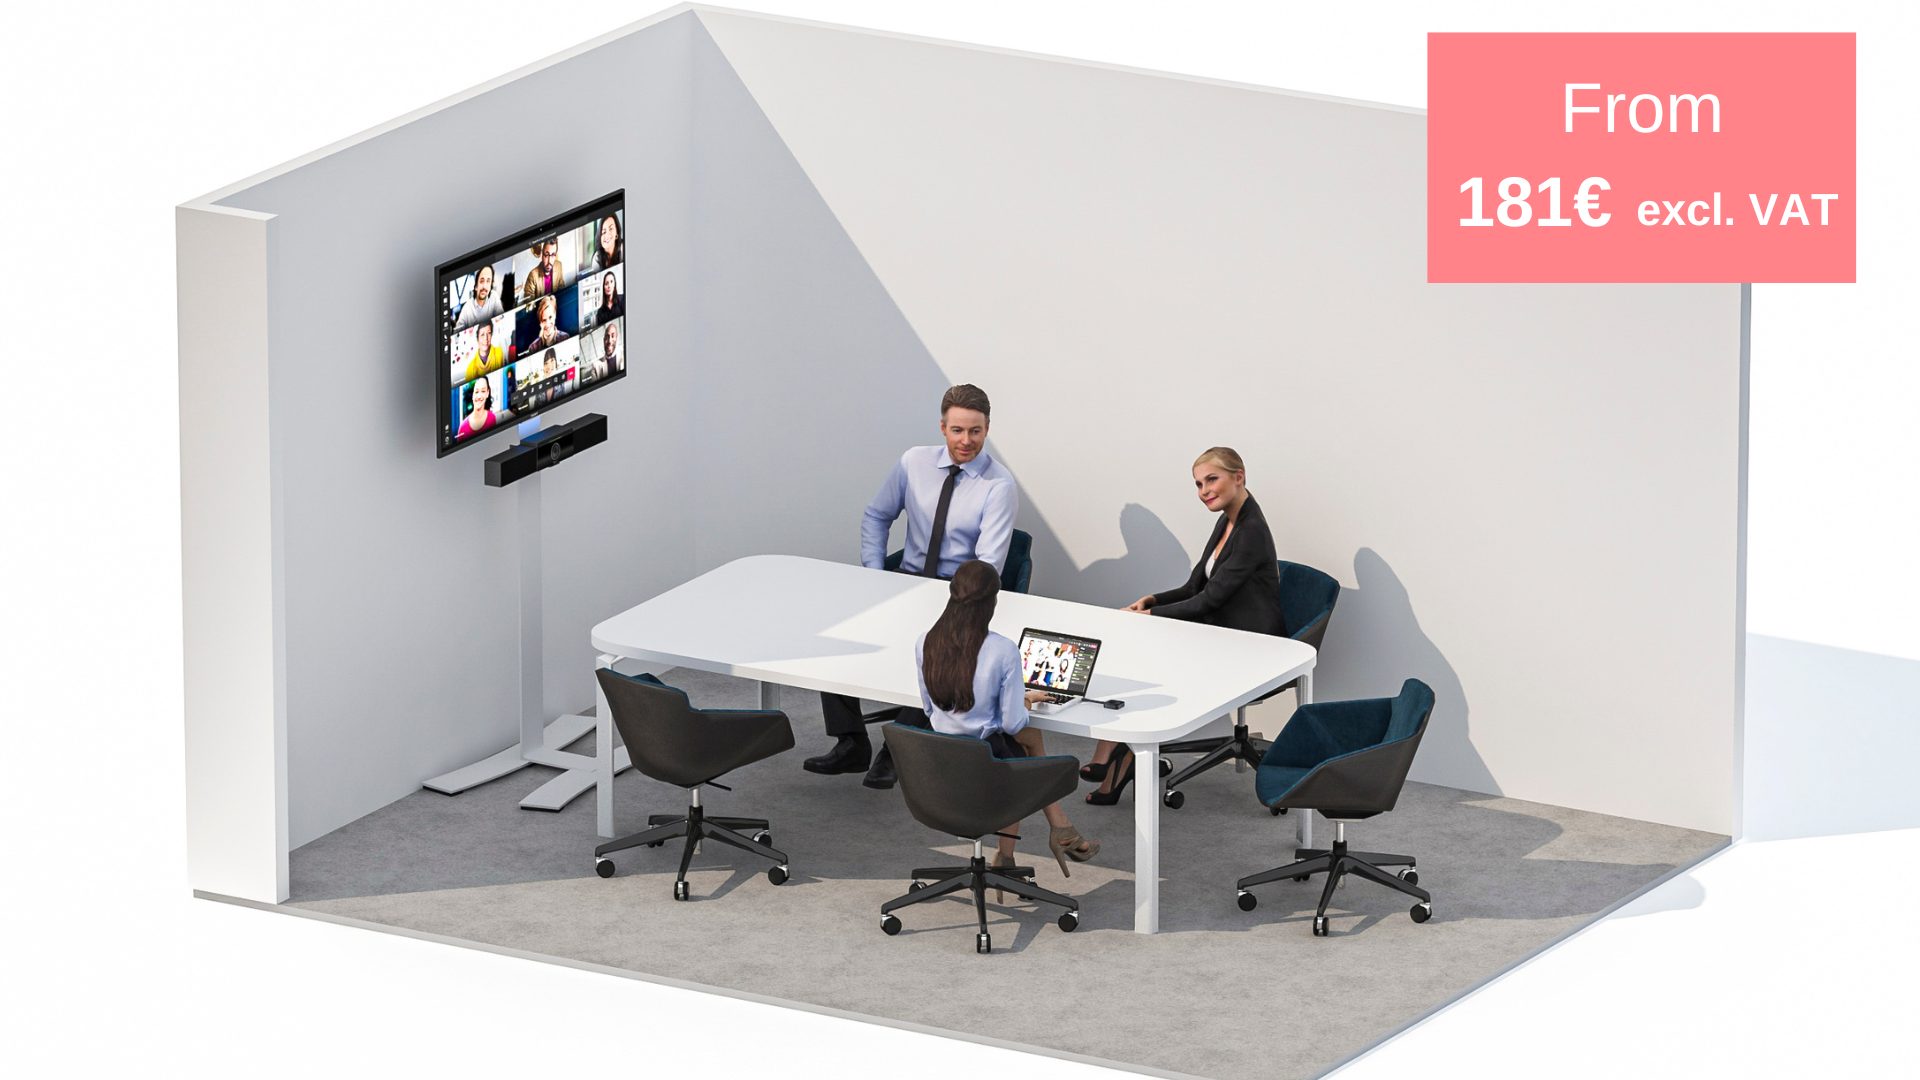 BYOD BYOM Videlio meeting rooms video conferencing collaboration